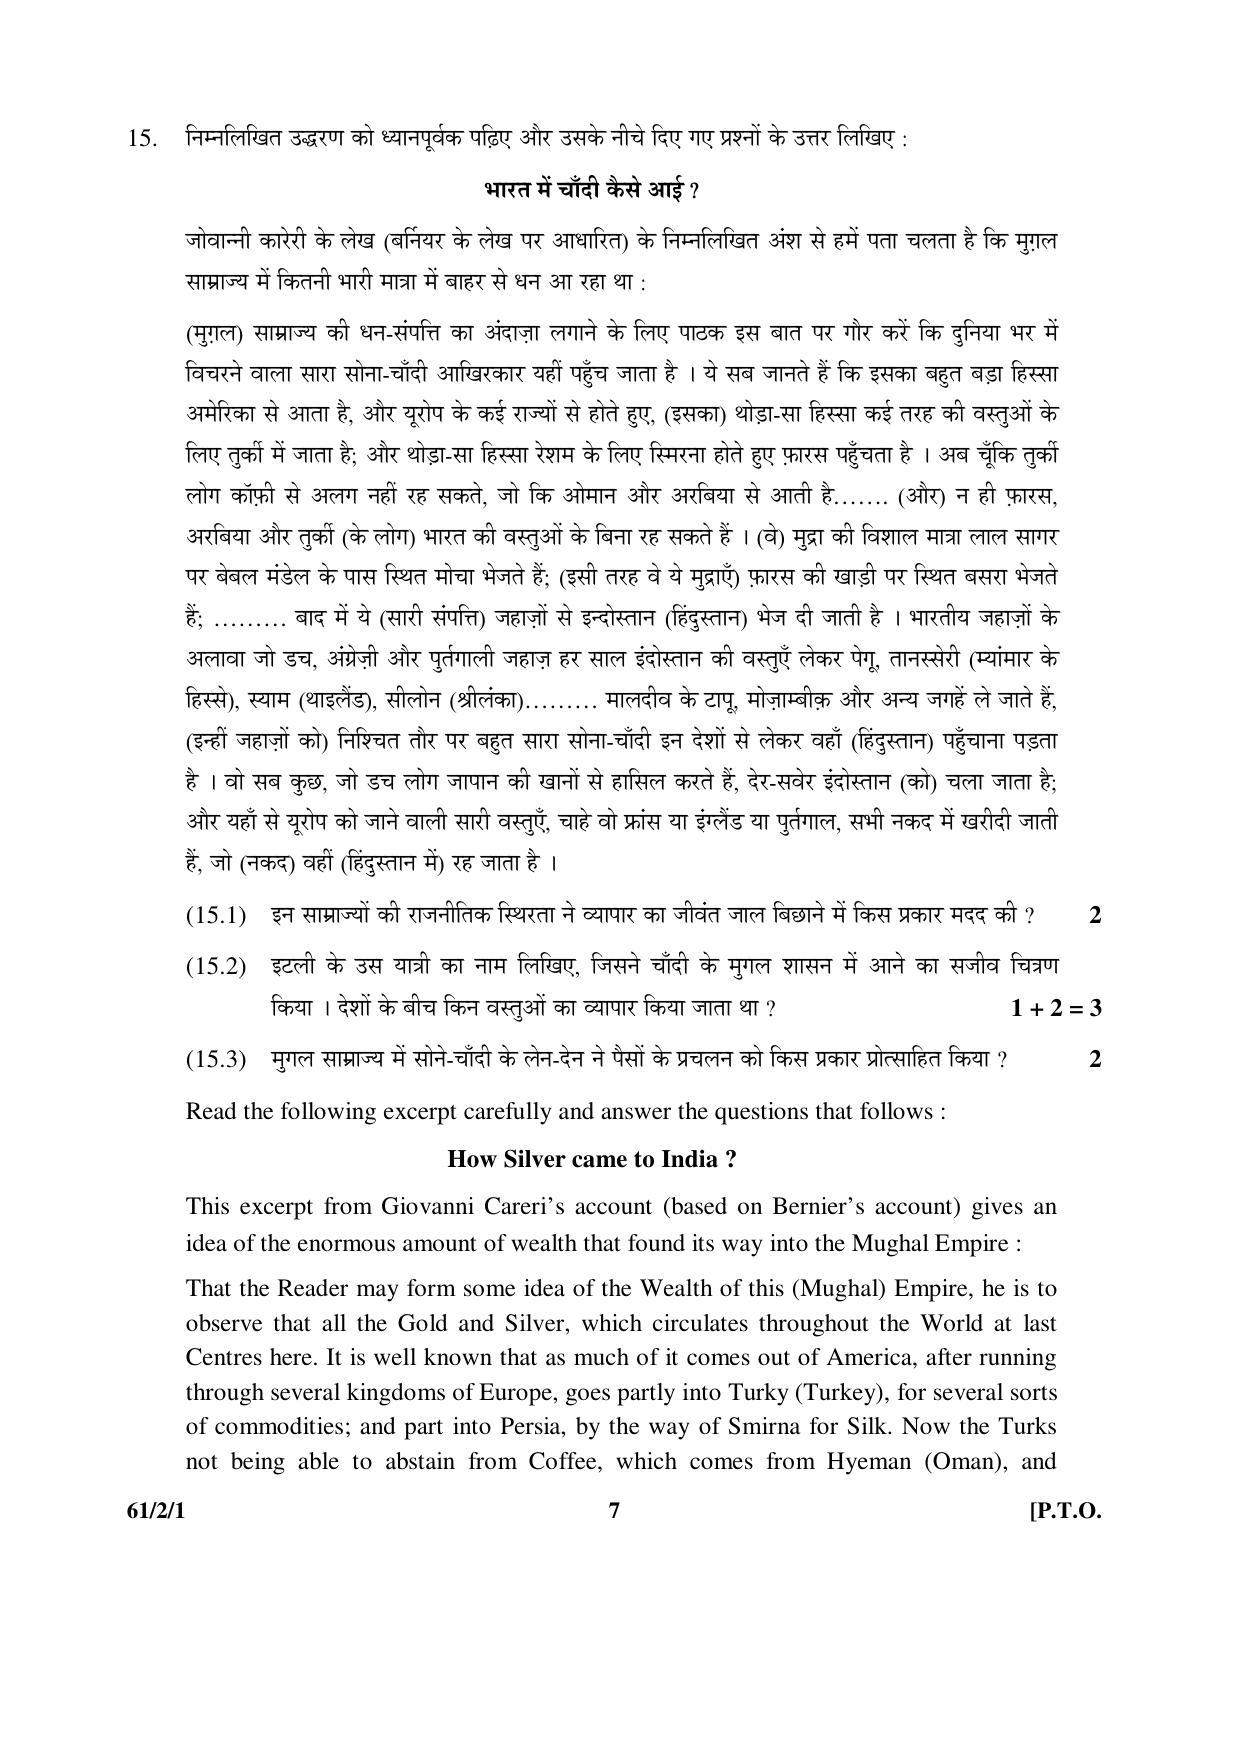 CBSE Class 12 61-2-1 History 2016 Question Paper - Page 7